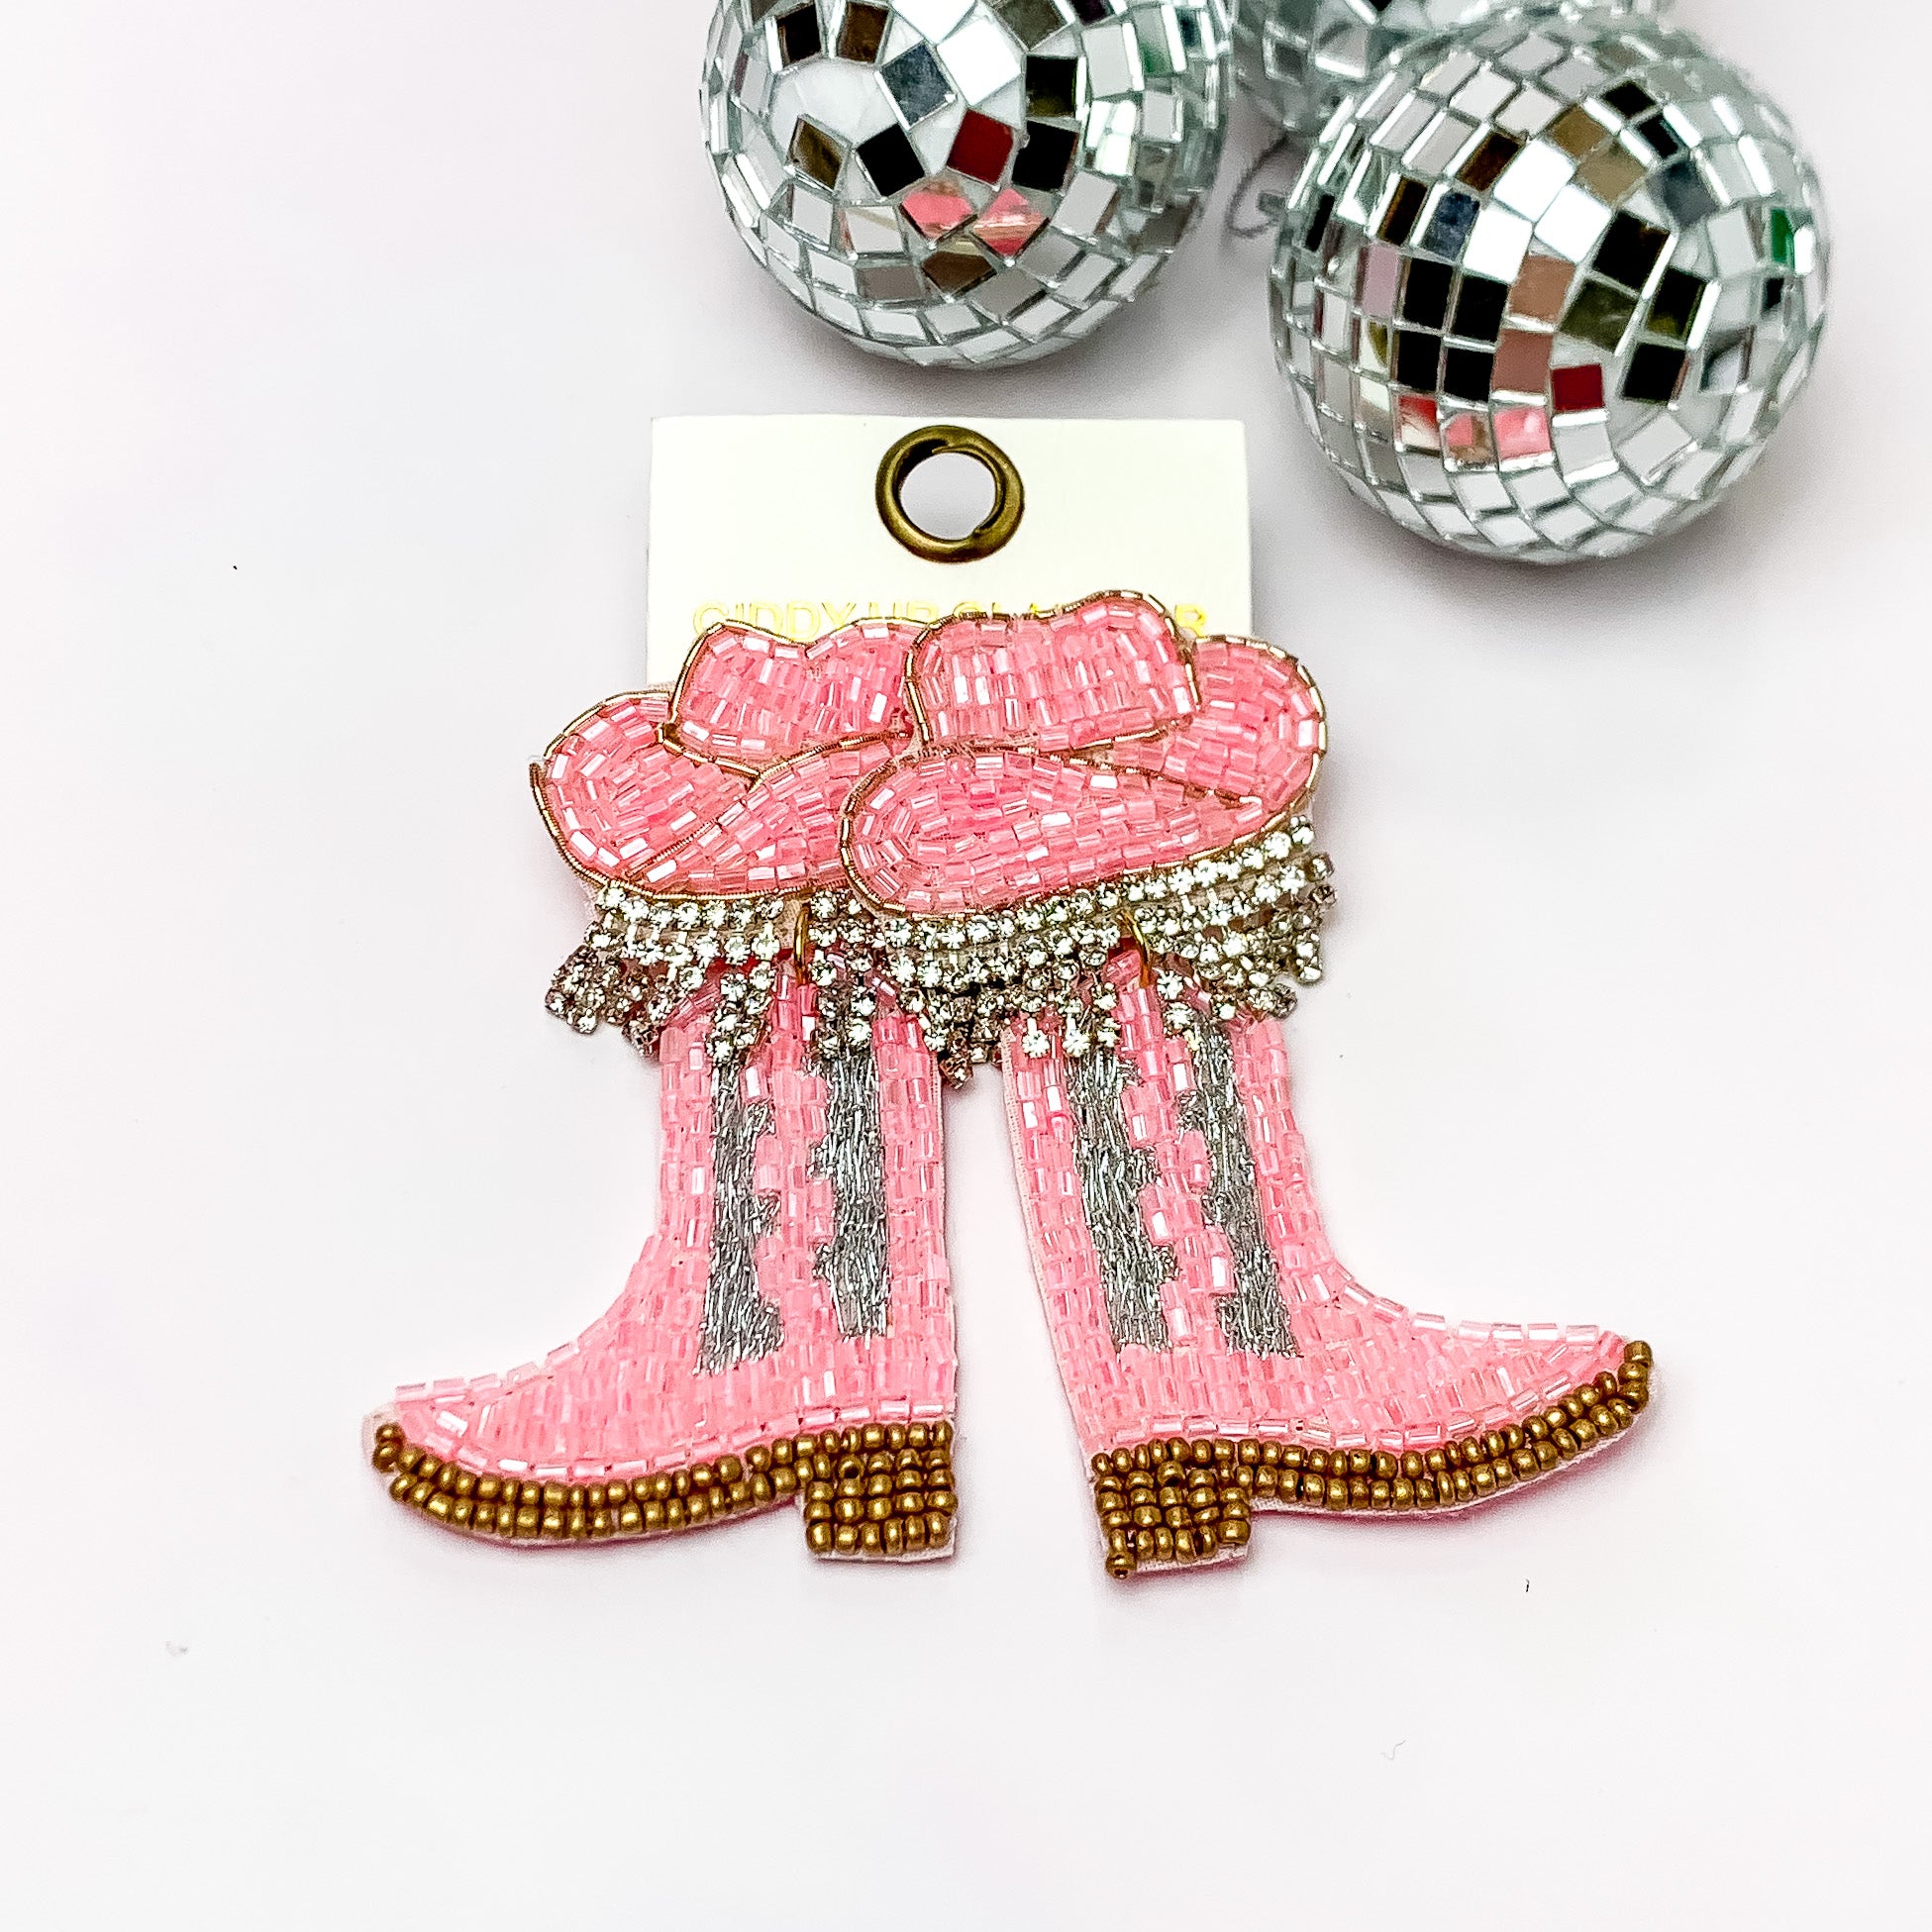 Beaded Light Pink Cowboy Boot Earrings with Hat Studs. Pictured on a white background with disco balls in the top right corner.